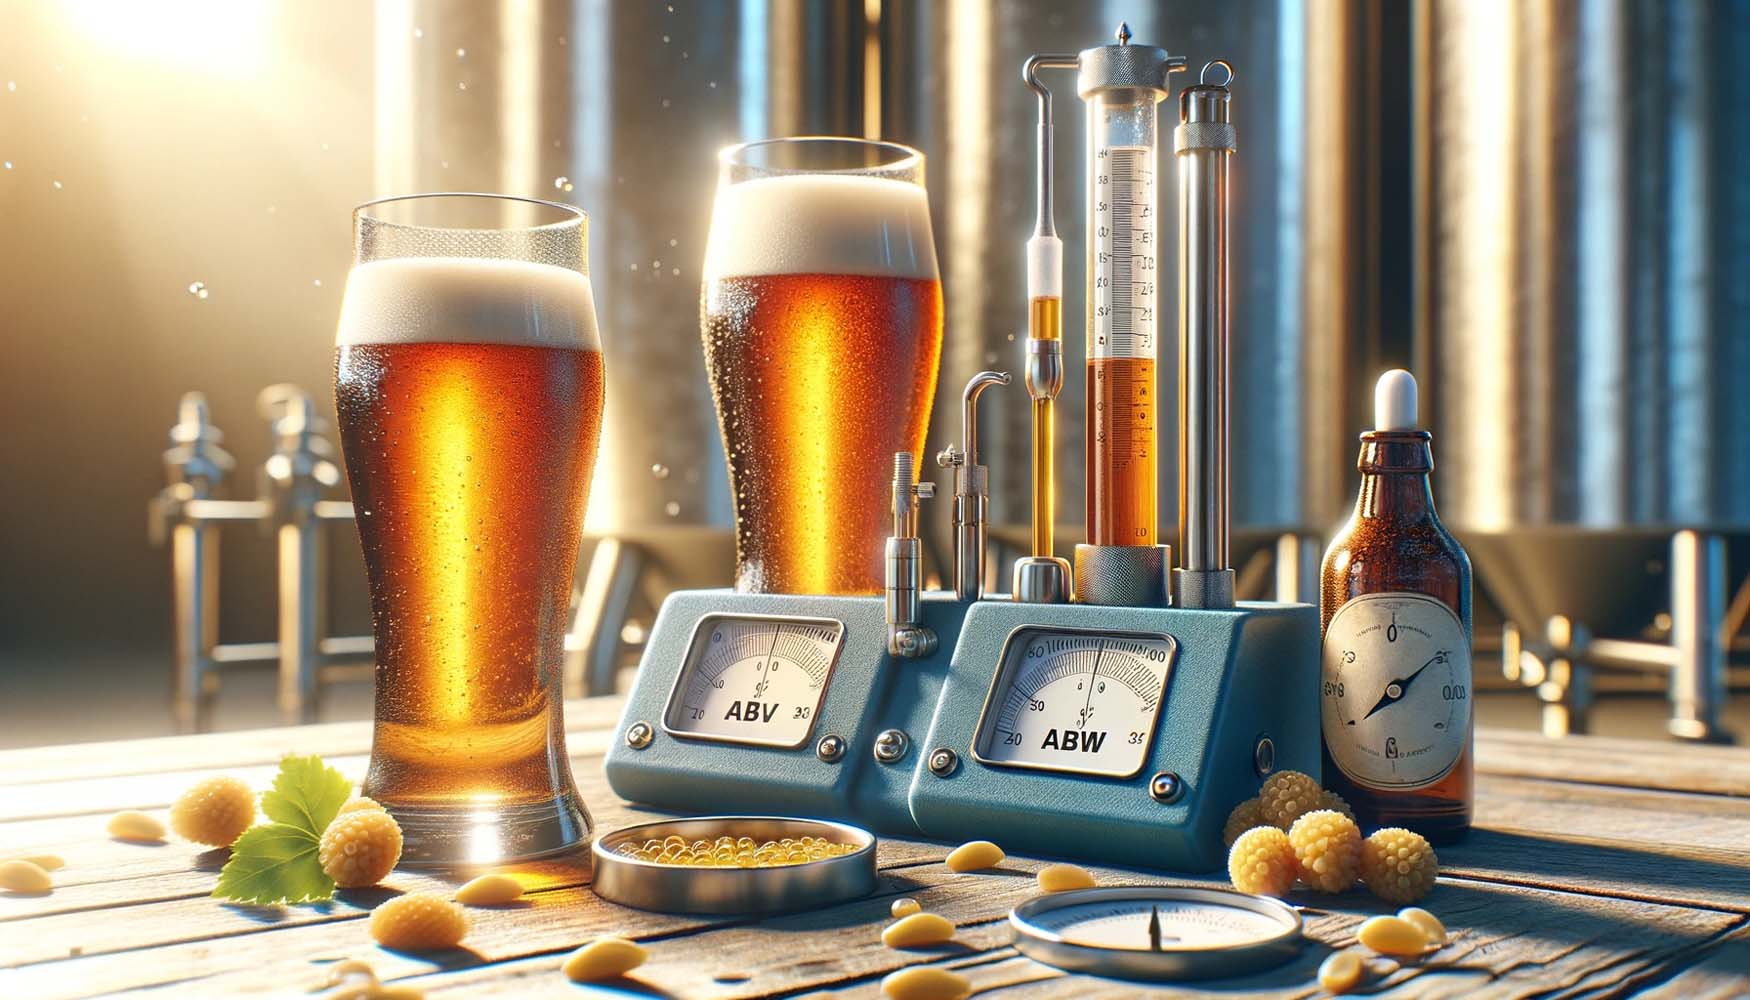 Understanding the Difference Between Alcohol By Volume (ABV) and Alcohol By Weight (ABW)